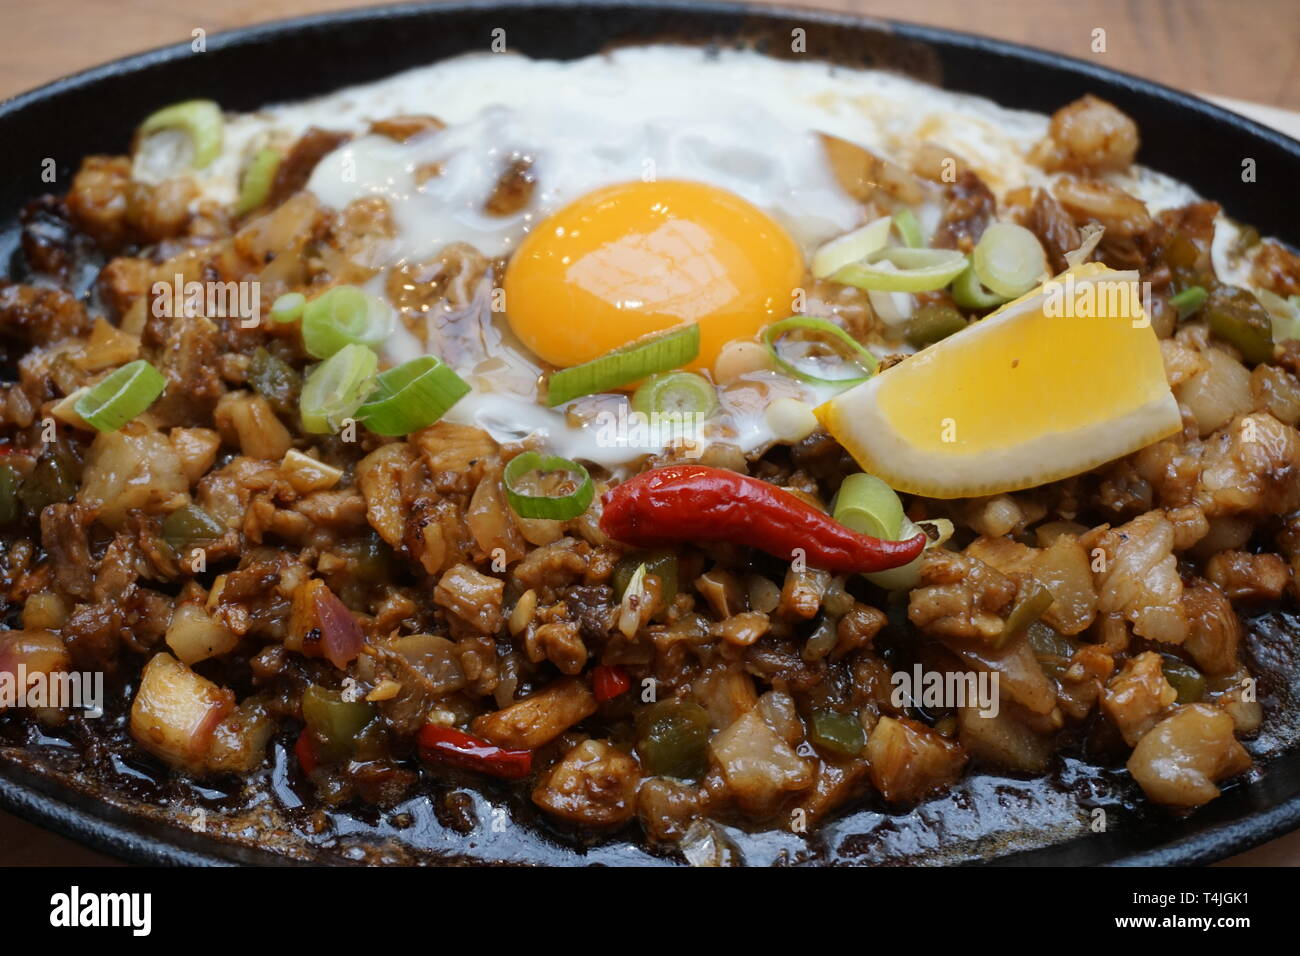 Delicious Pork sisig sizzling mince pork Filipino food with raw egg cooking hot on clay pot tray with lemon slice and fresh red chilies Asian cuisine Stock Photo